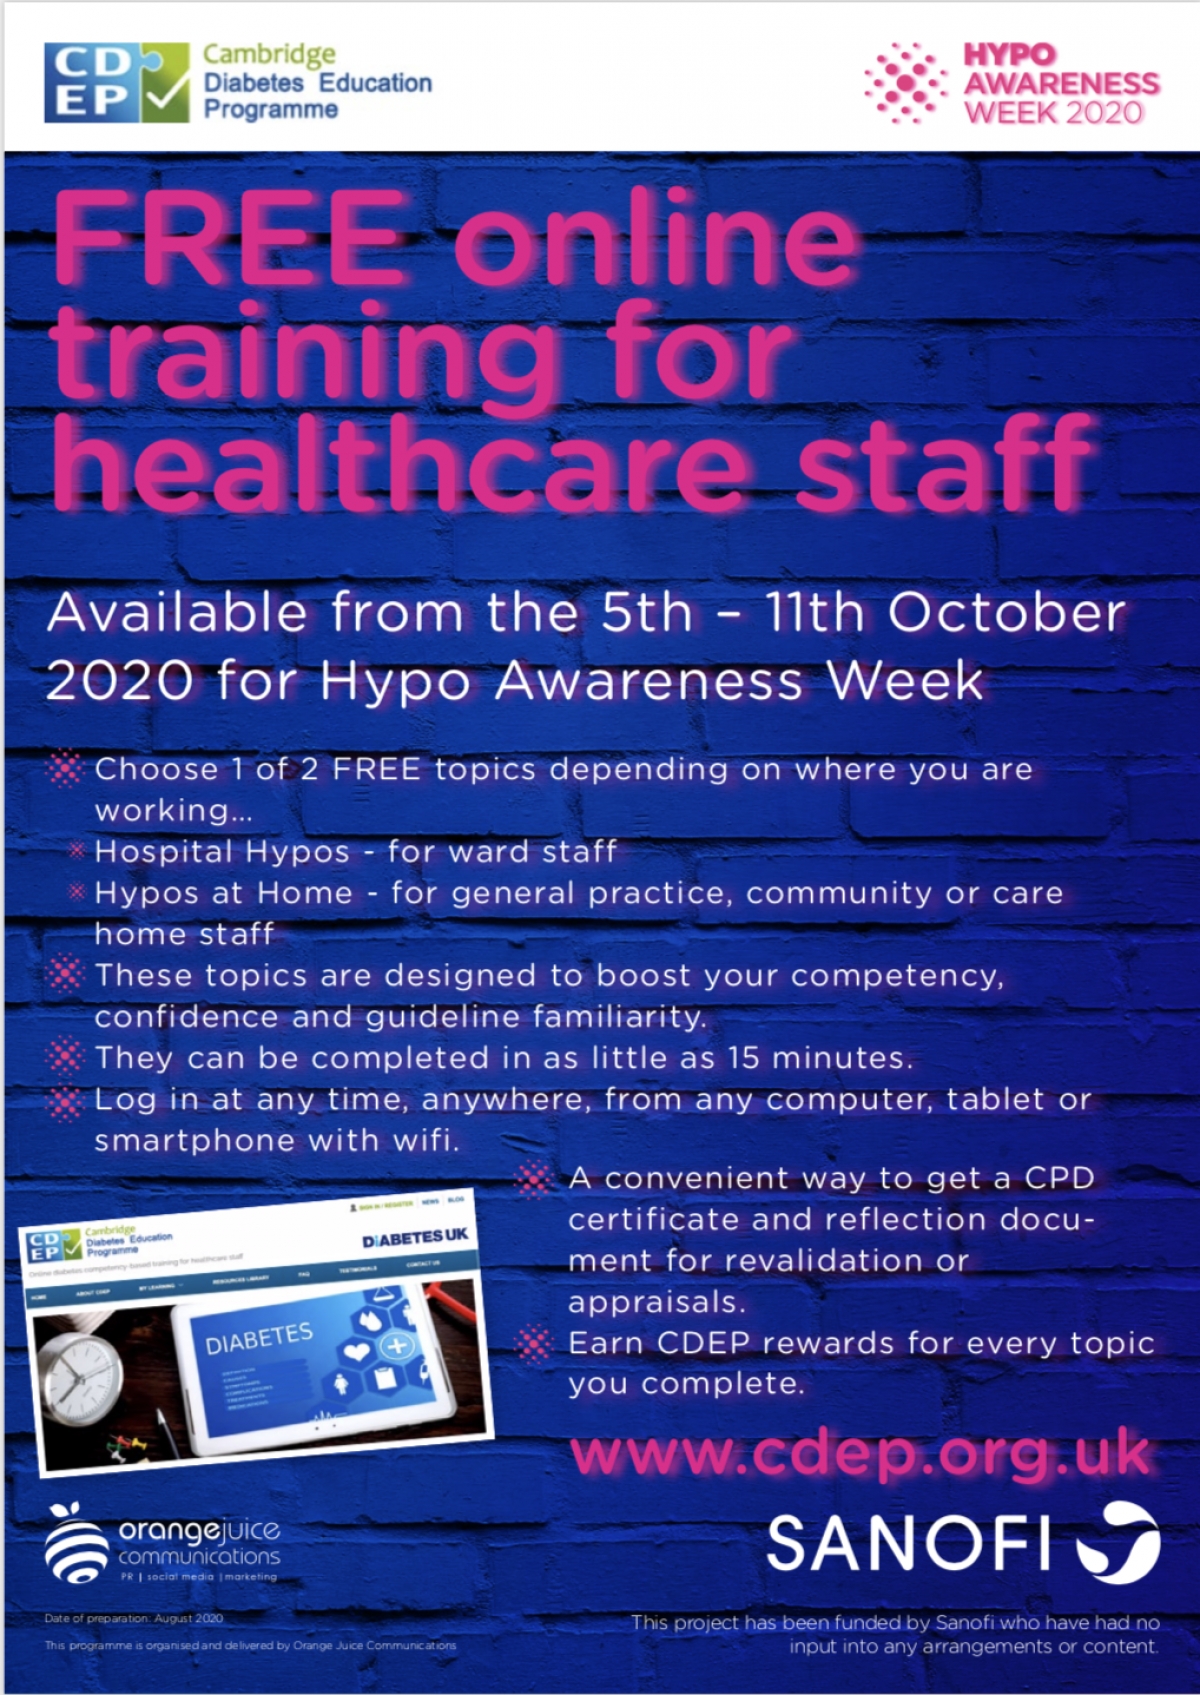 Hypo Awareness Week 2020: 5th - 11th October